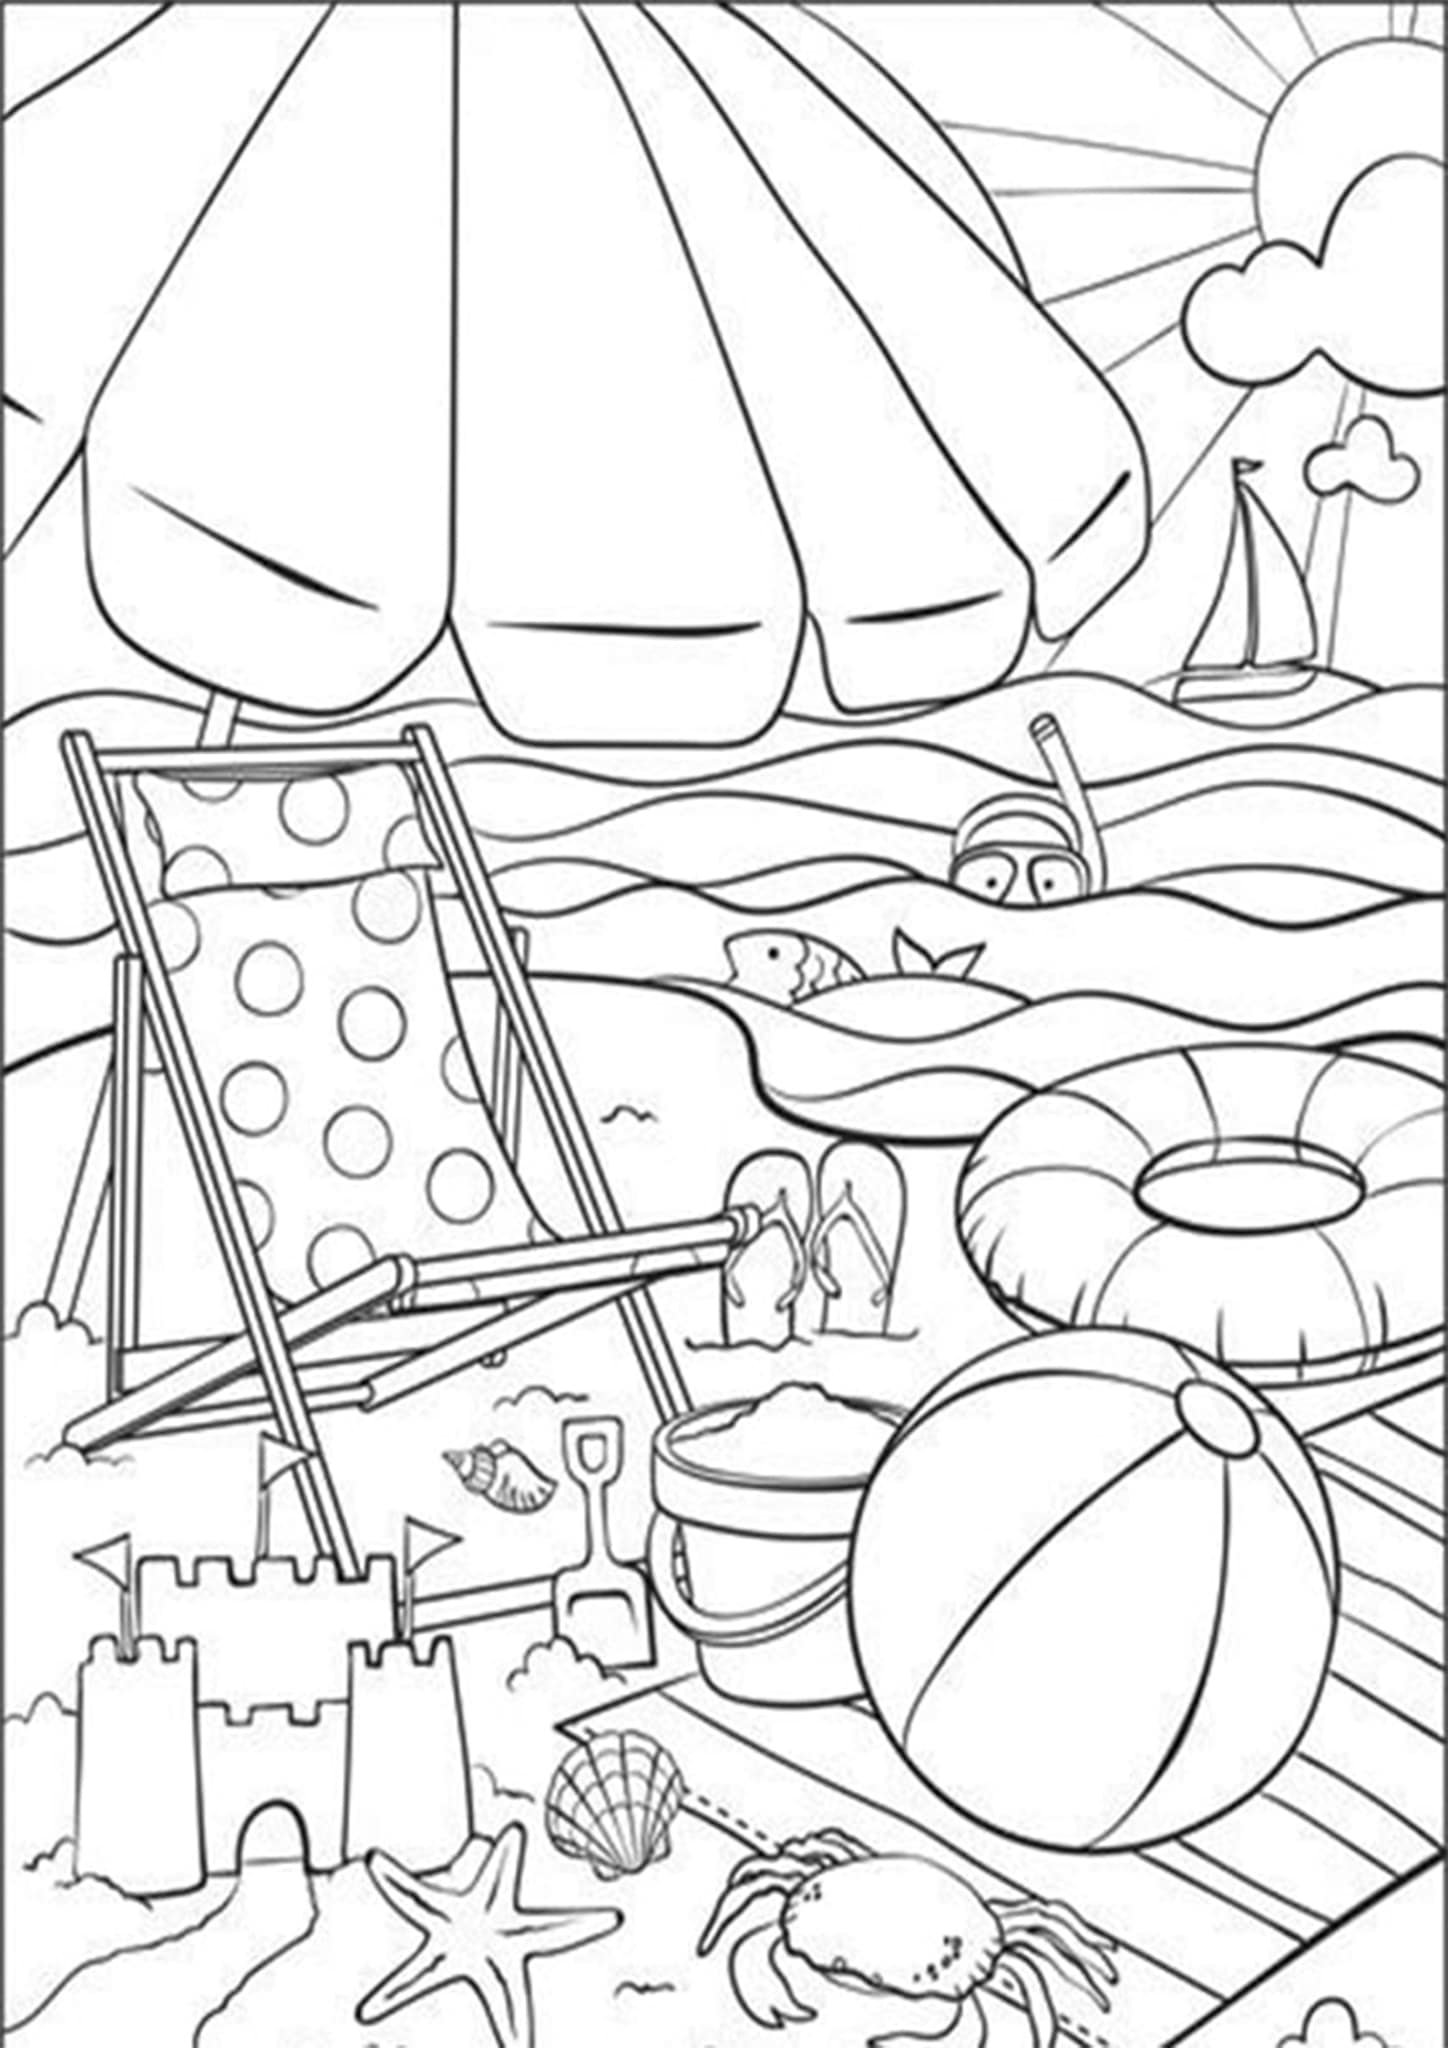 Printable Summer Coloring Pages